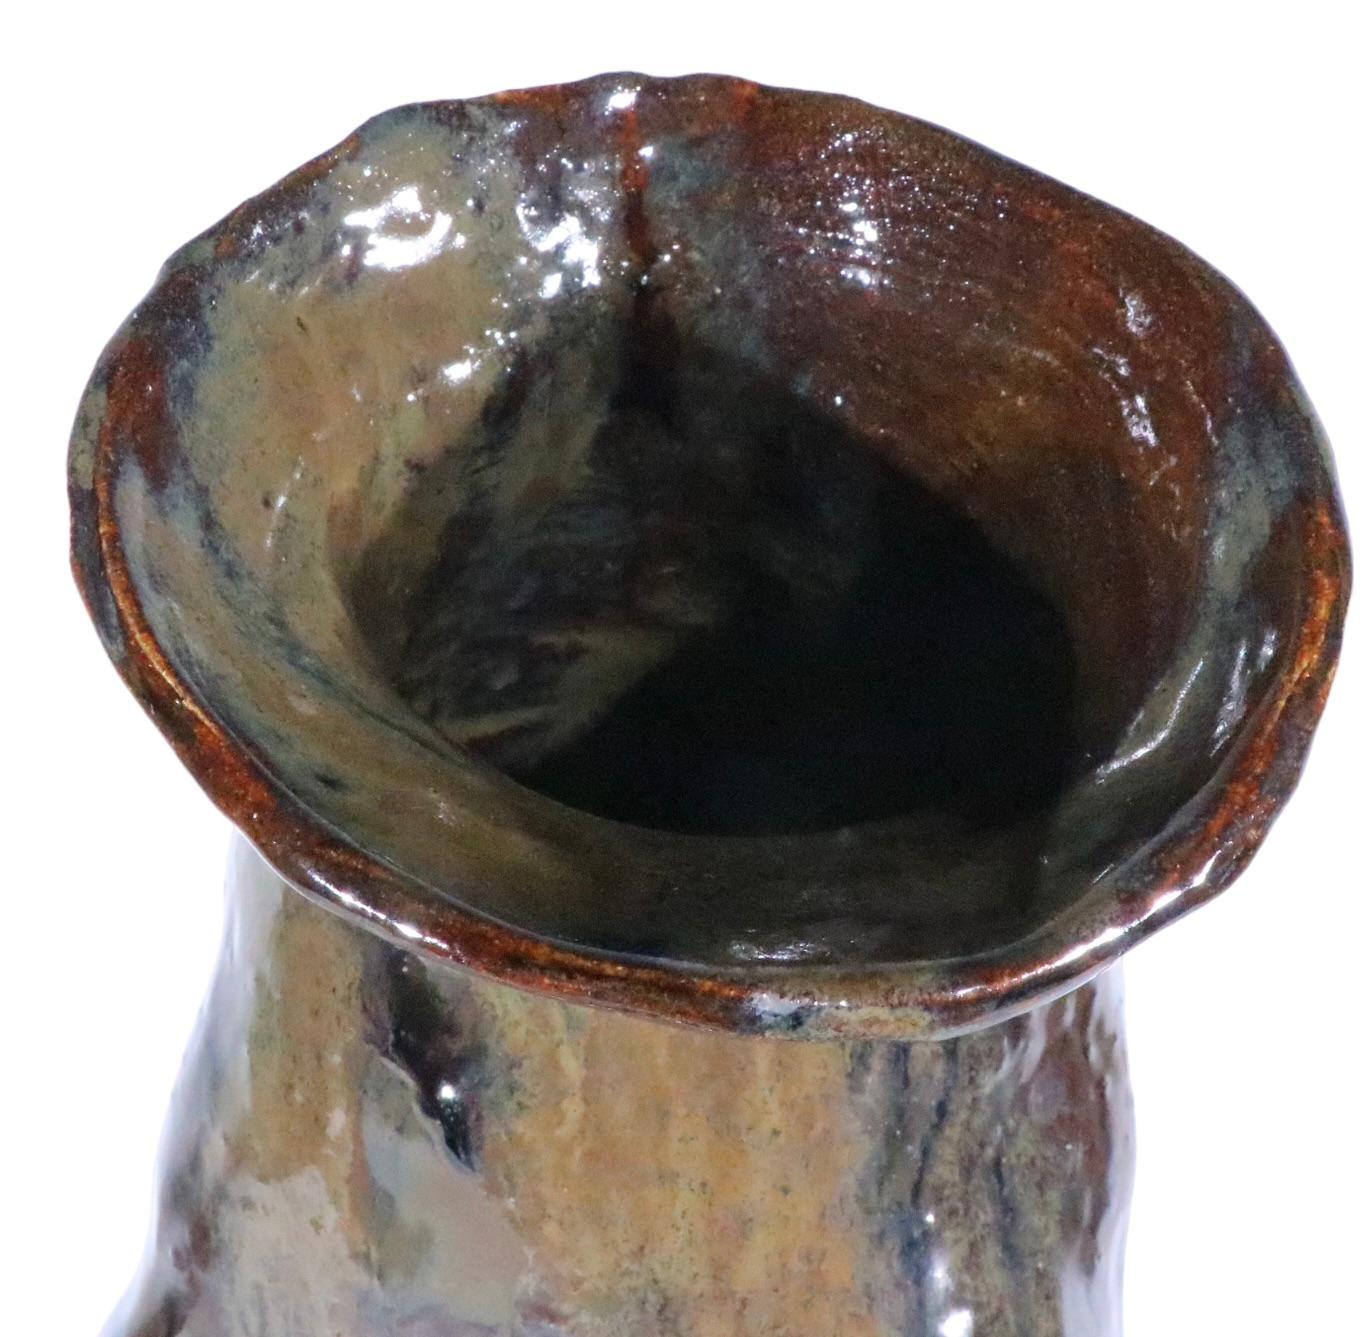 Abstract Organic Mod Century Post Modern Handmade Pottery Sculpture Vase 1970s For Sale 6